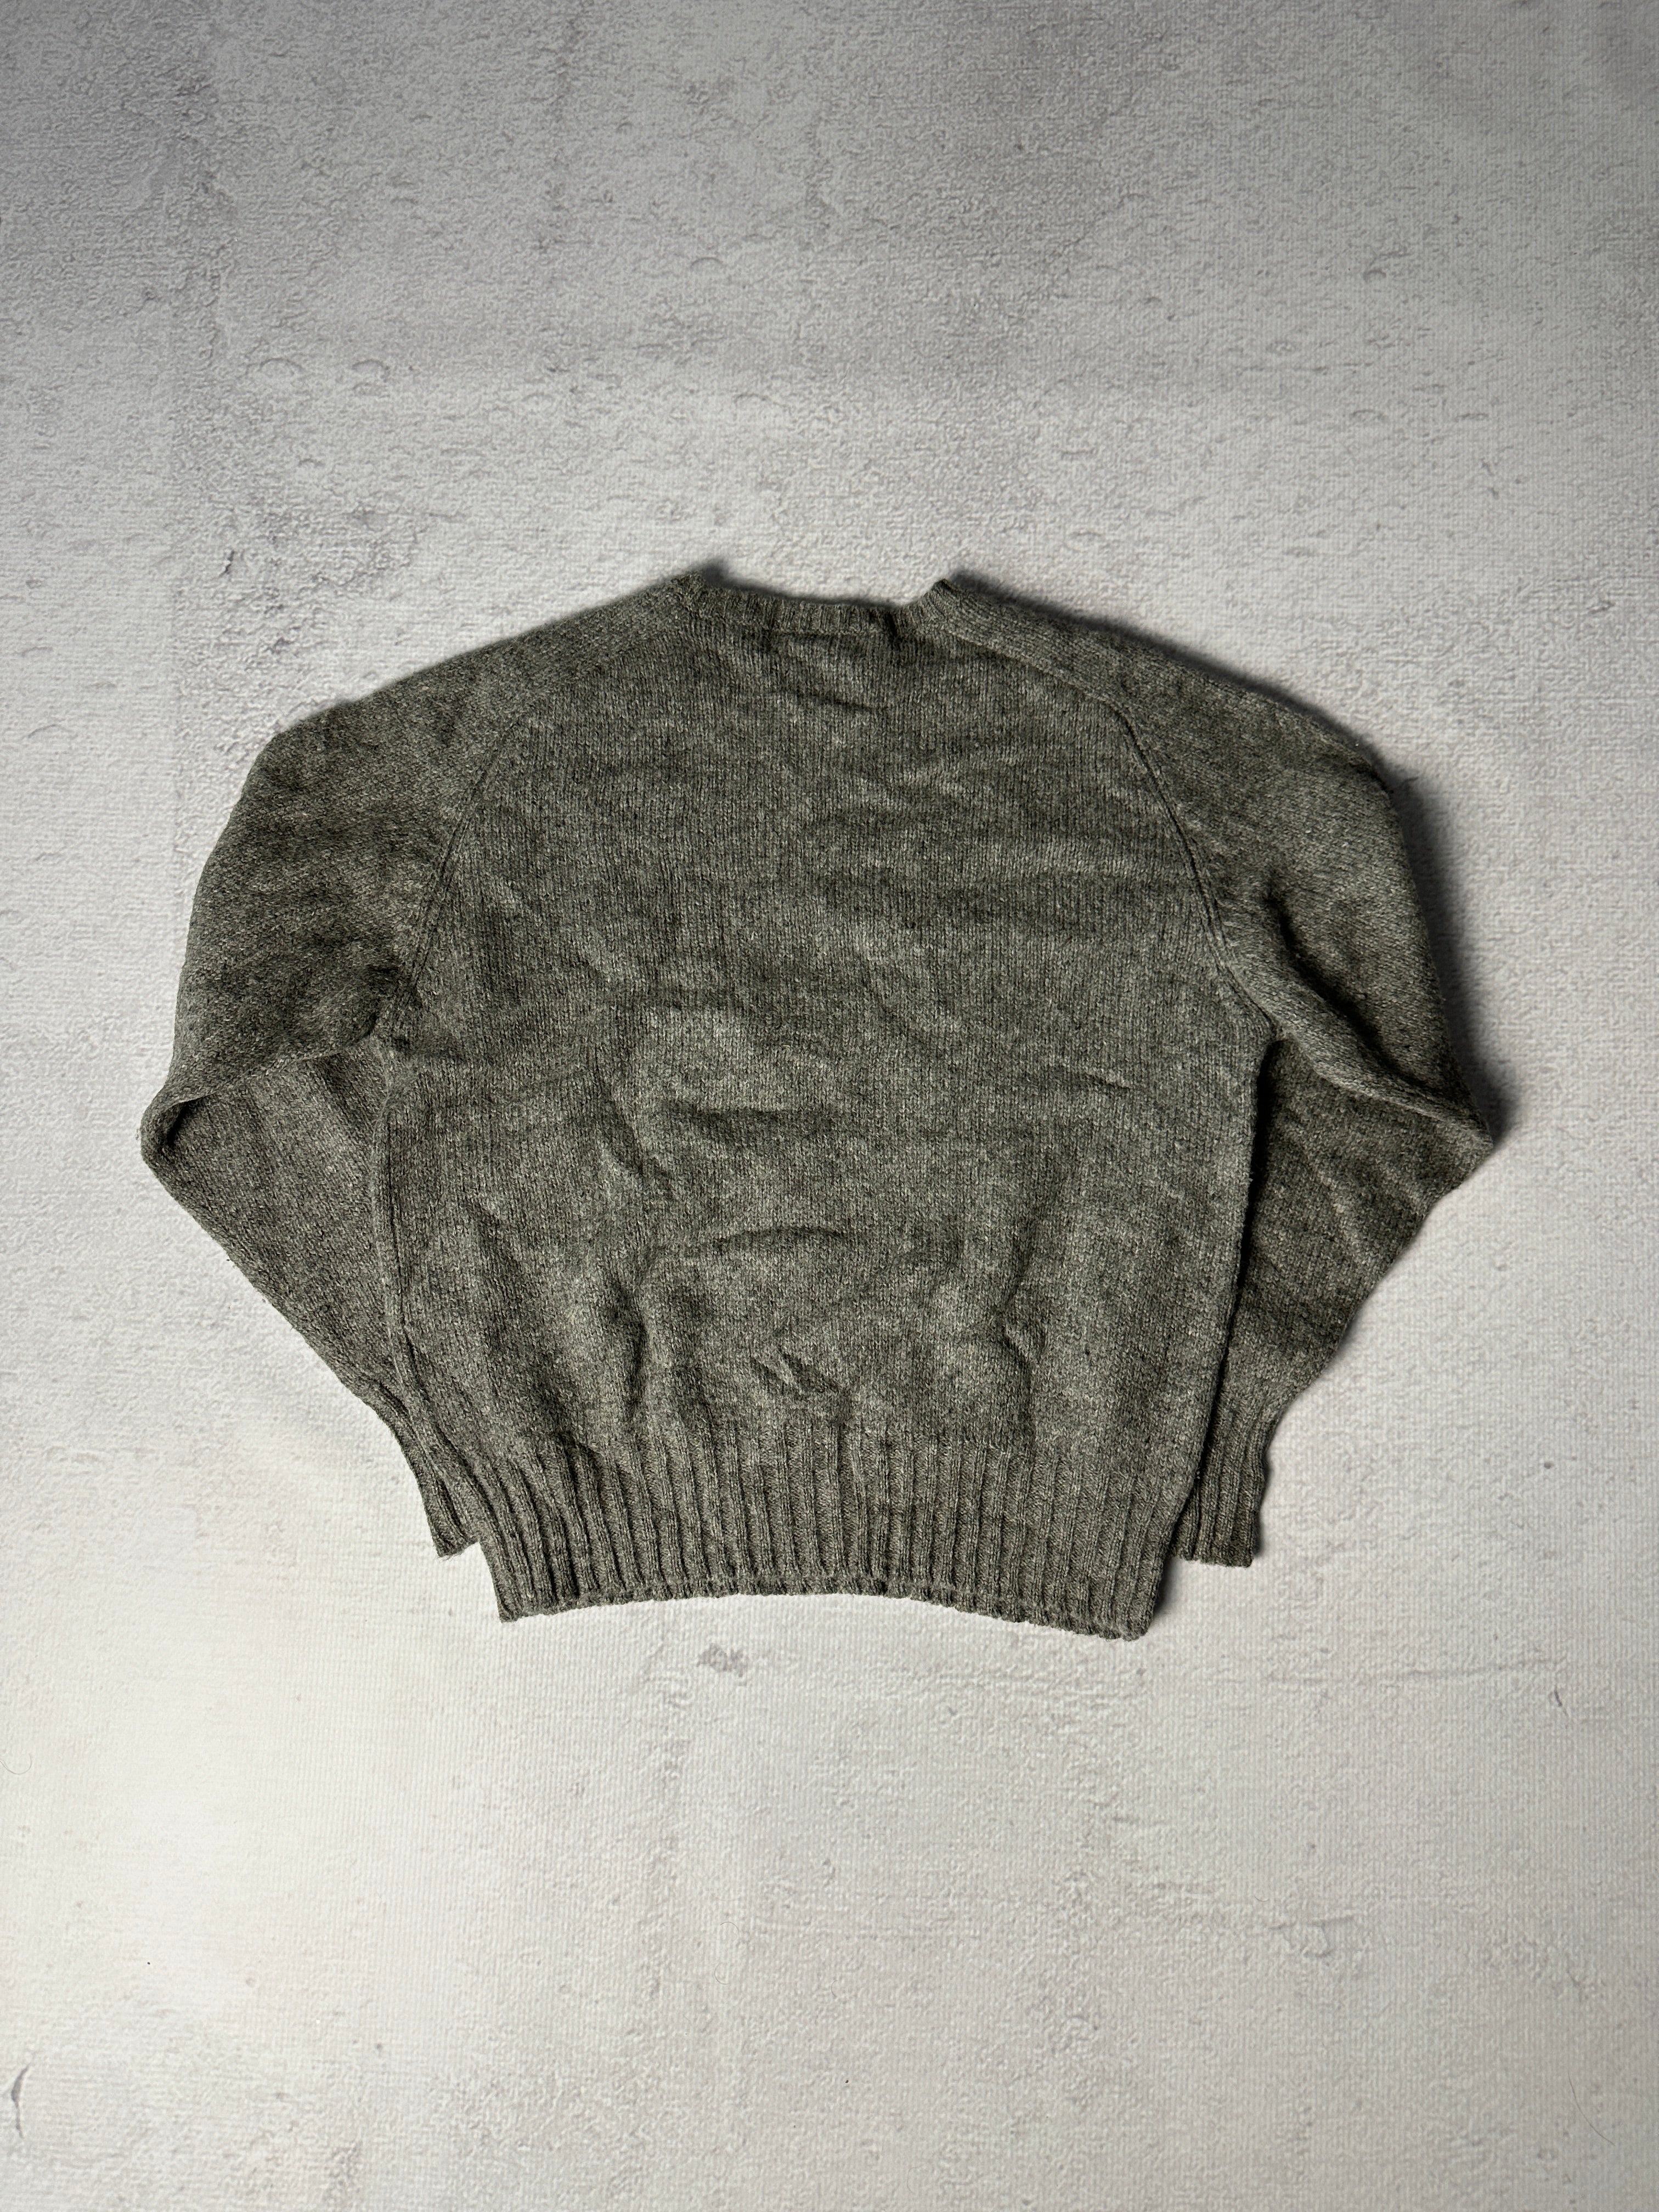 Vintage Polo Ralph Lauren Knitted Sweater - Women's Small